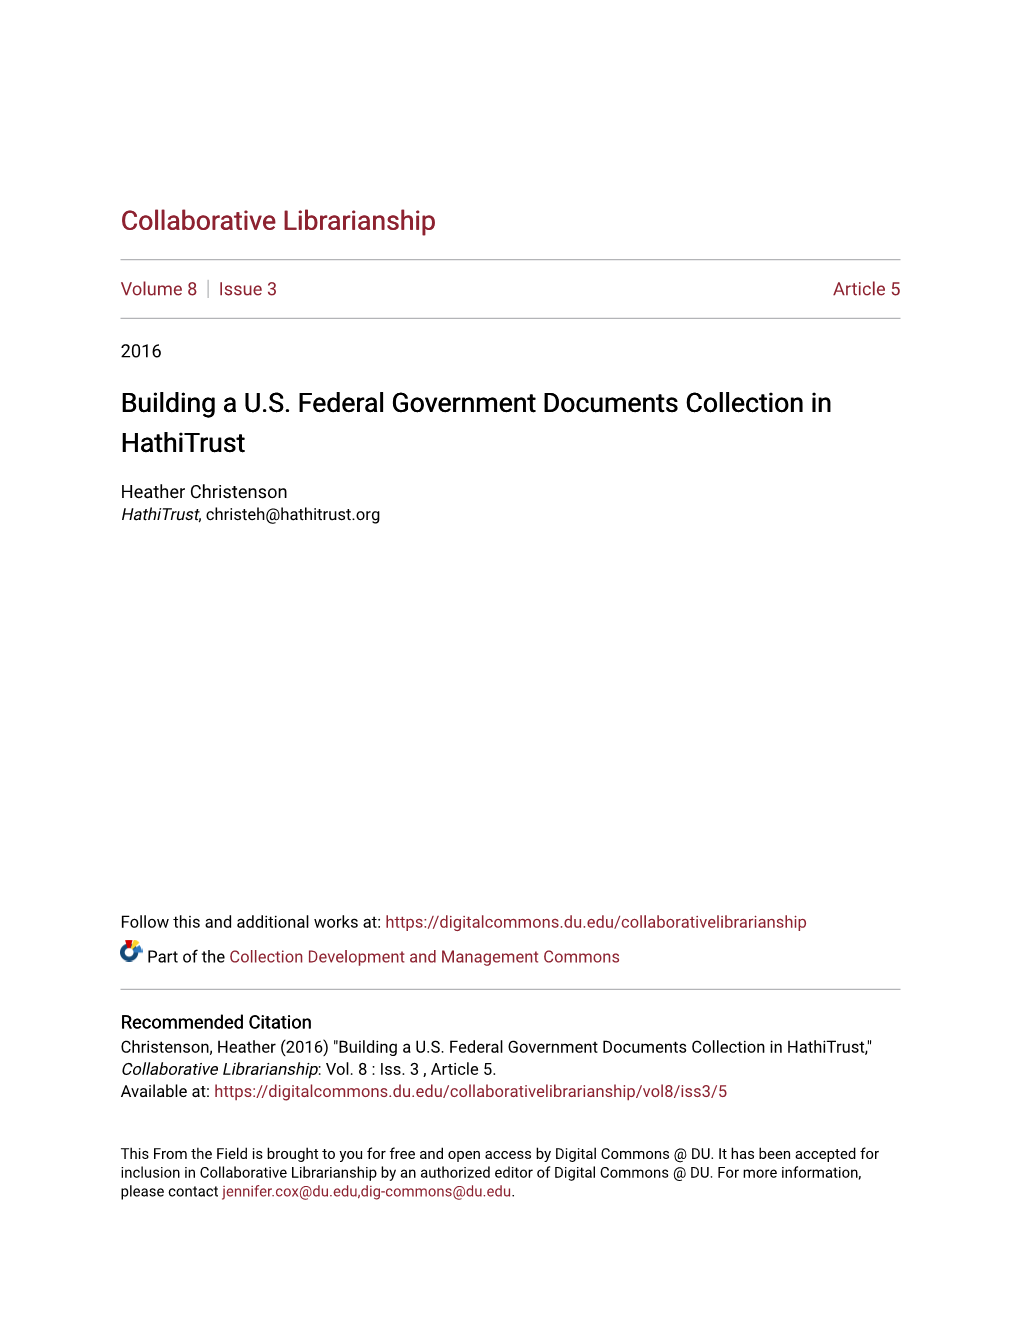 Building a U.S. Federal Government Documents Collection in Hathitrust